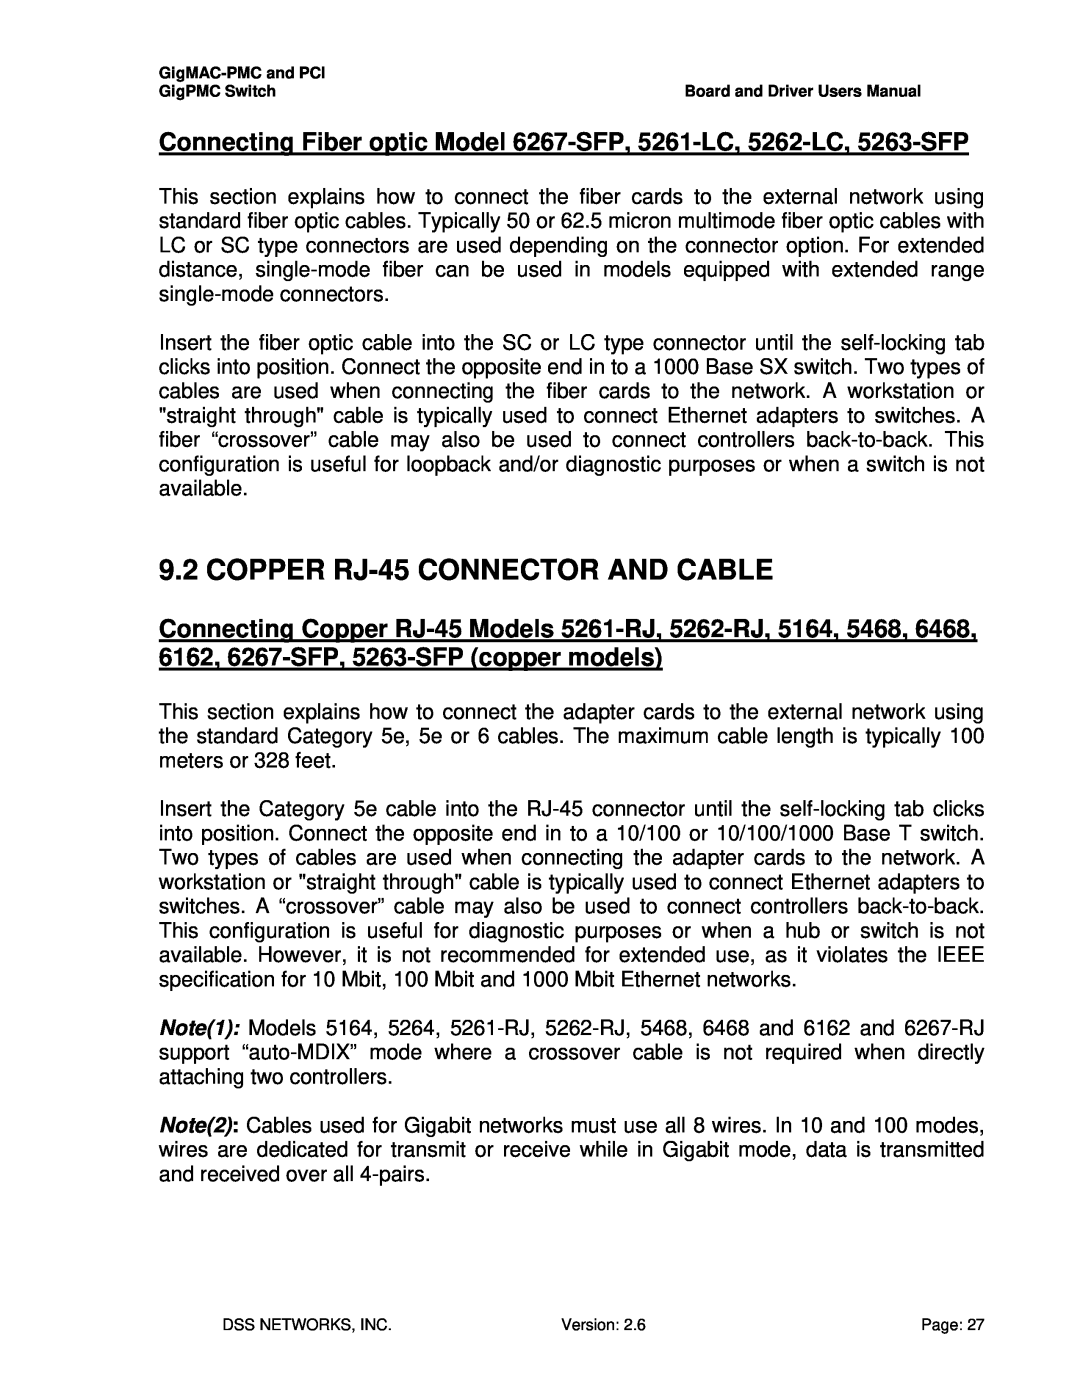 Intel PCI-X user manual COPPER RJ-45CONNECTOR AND CABLE 